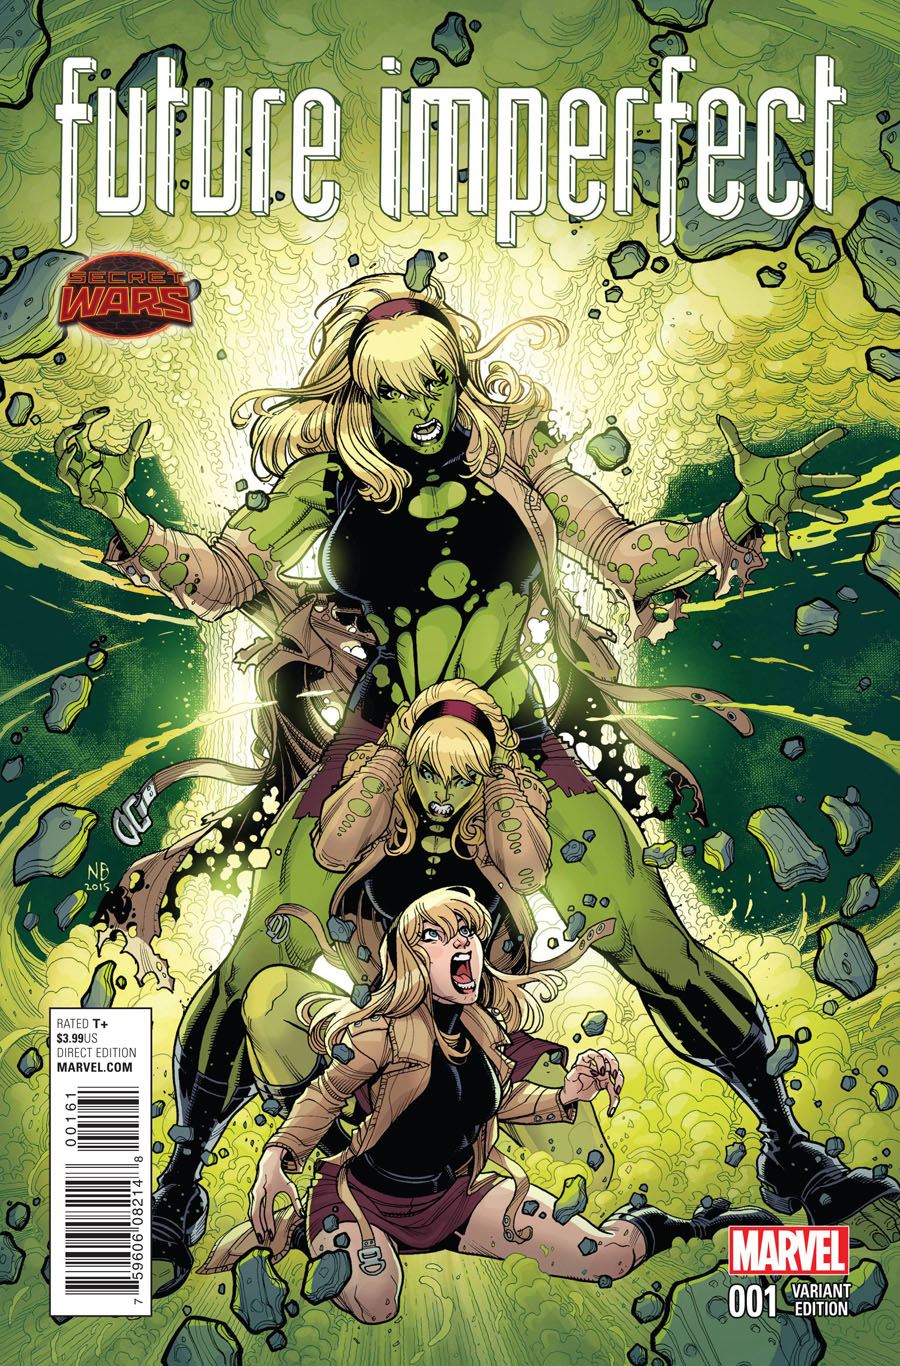 Future Imperfect #1 Cover B Variant Nick Bradshaw Ingwenible Hulk Cover (Secret Wars Warzones Tie-In)